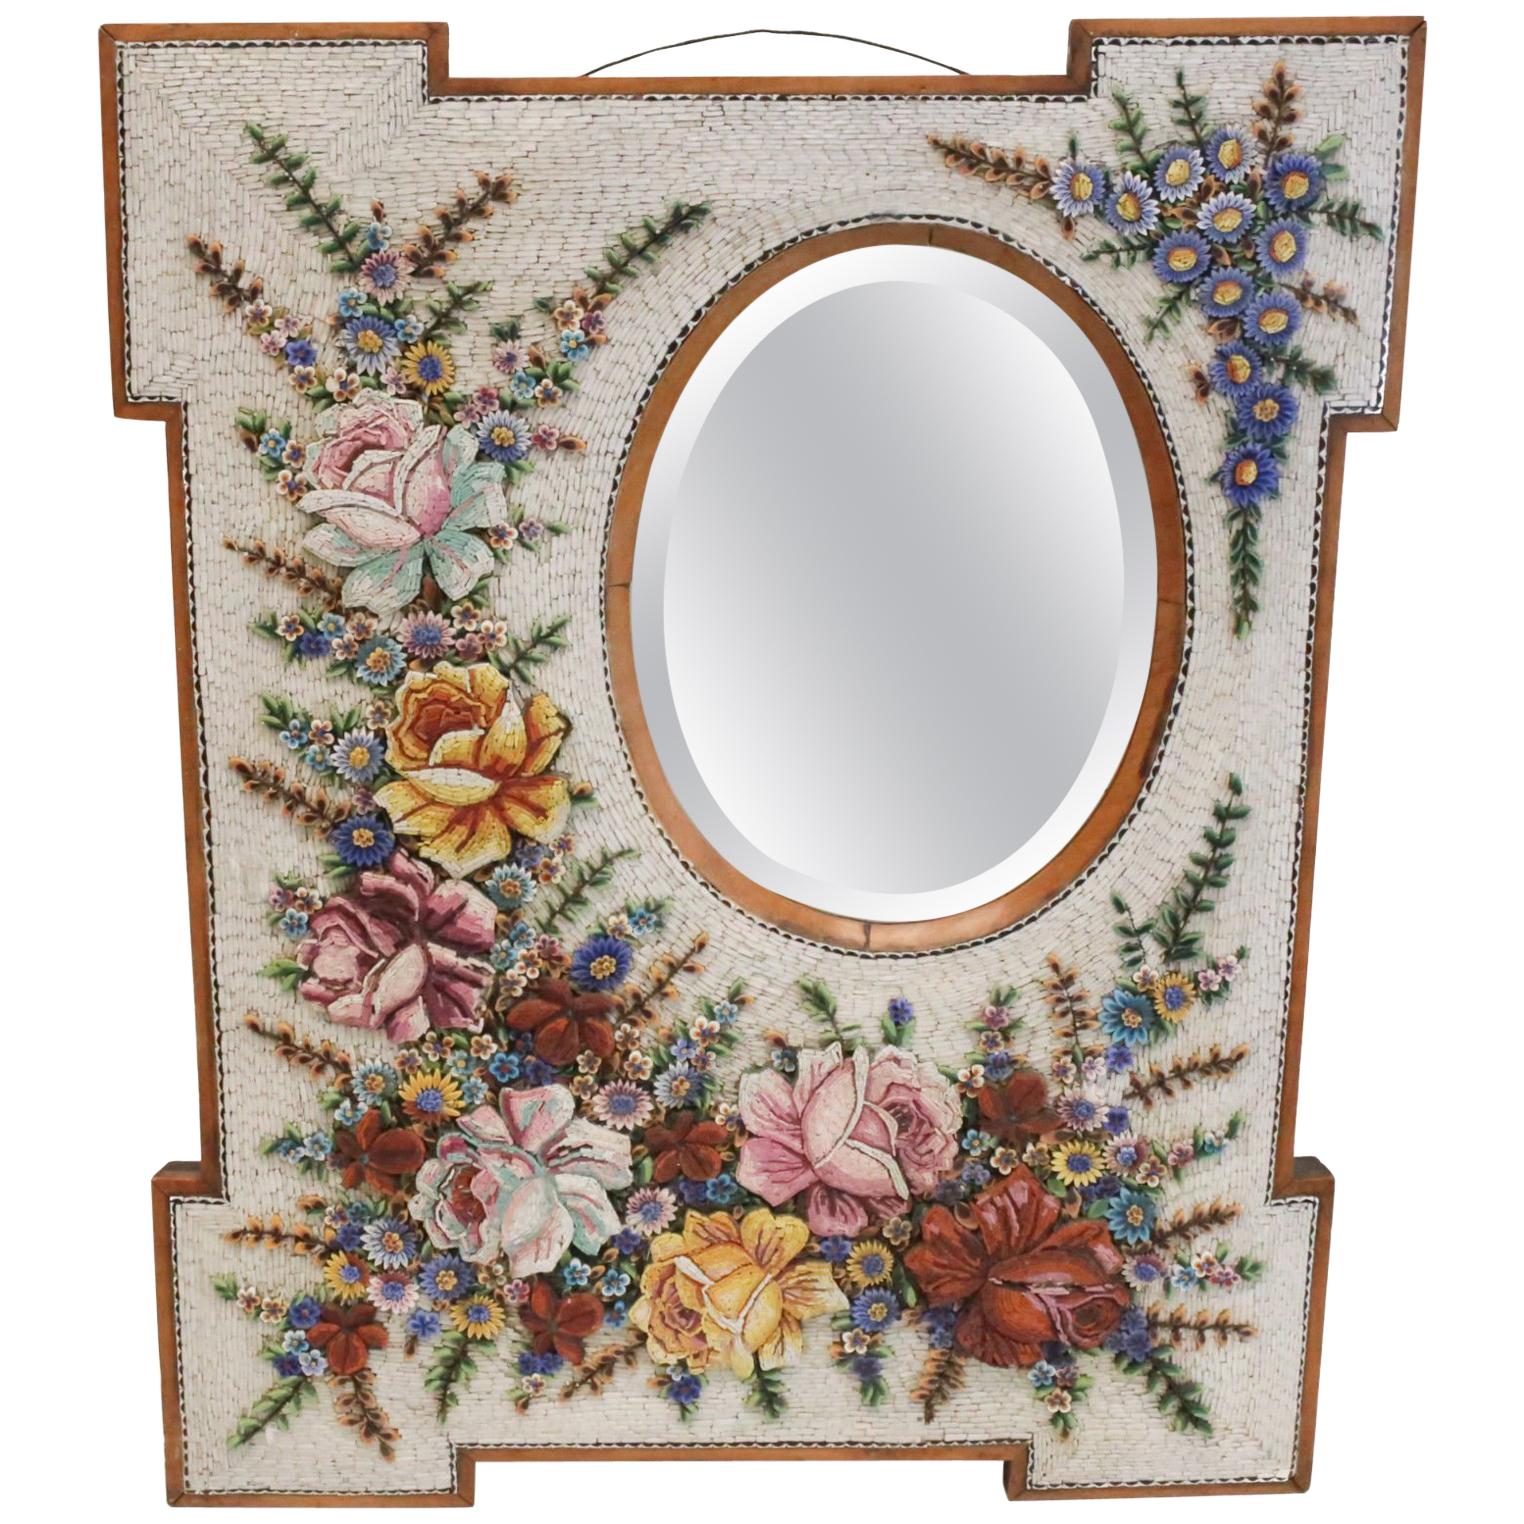 Large Antique Venetian Micromosaic Hanging Wall Mirror, Floral Designs For Sale